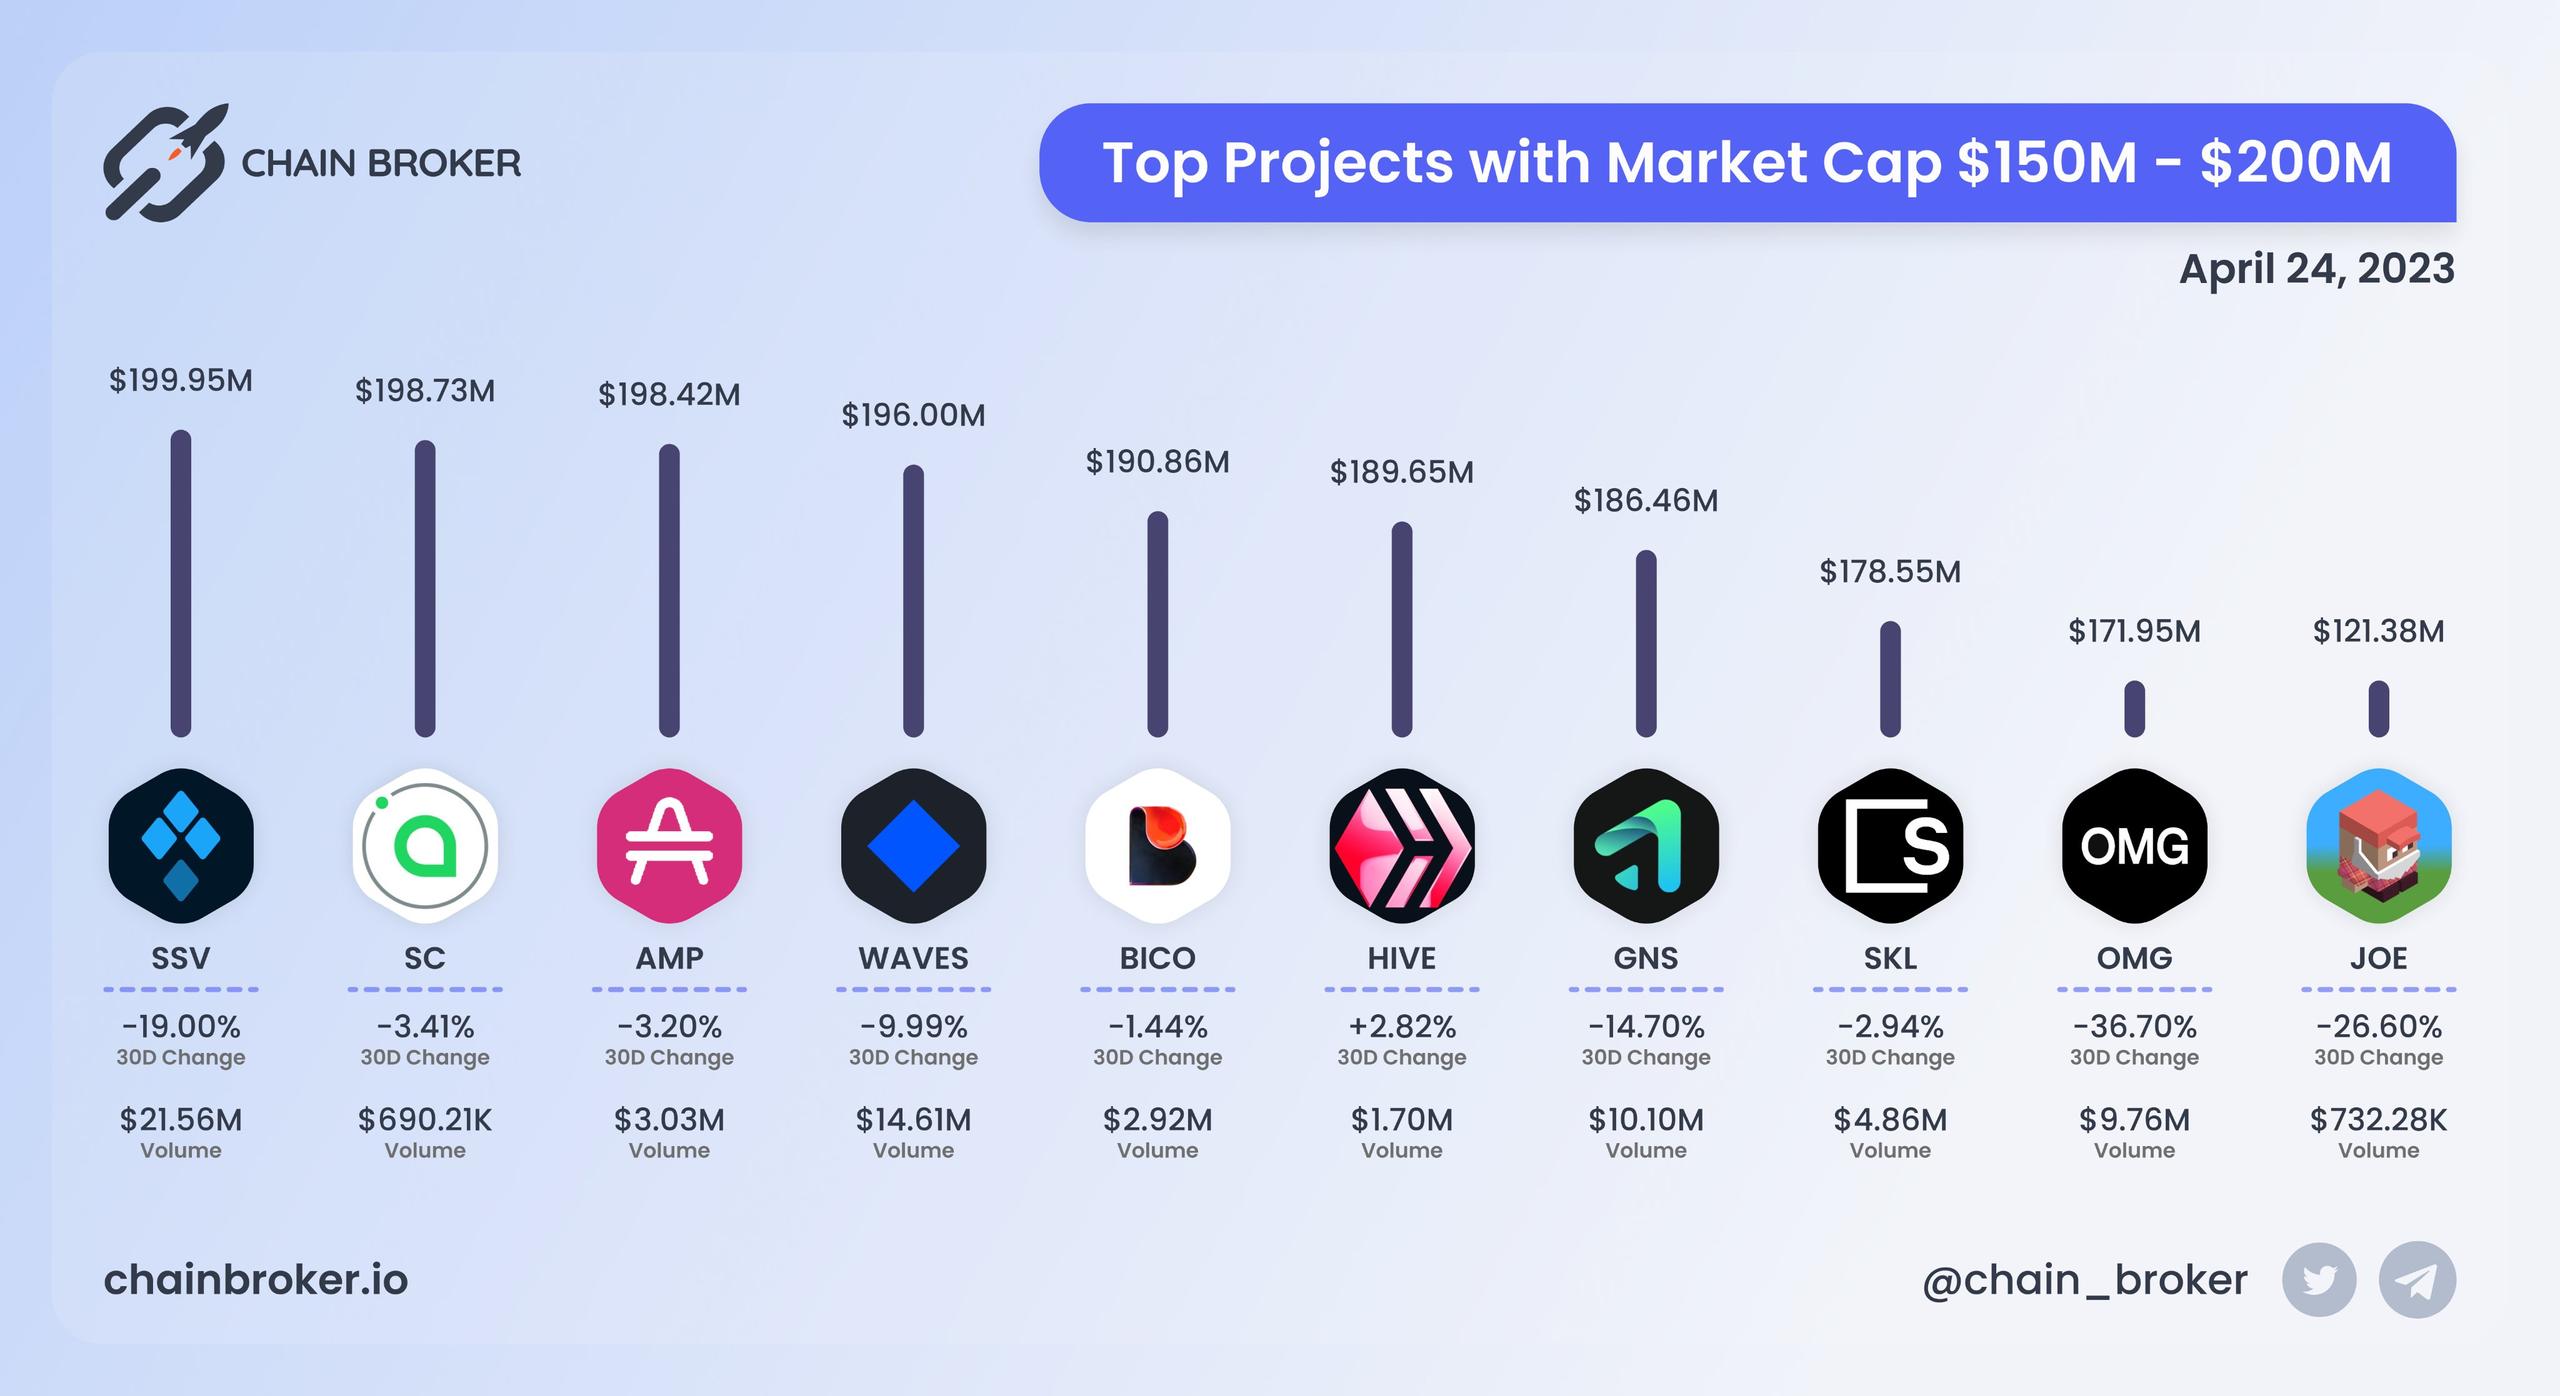 Top projects with Market Cap $150M - $200M